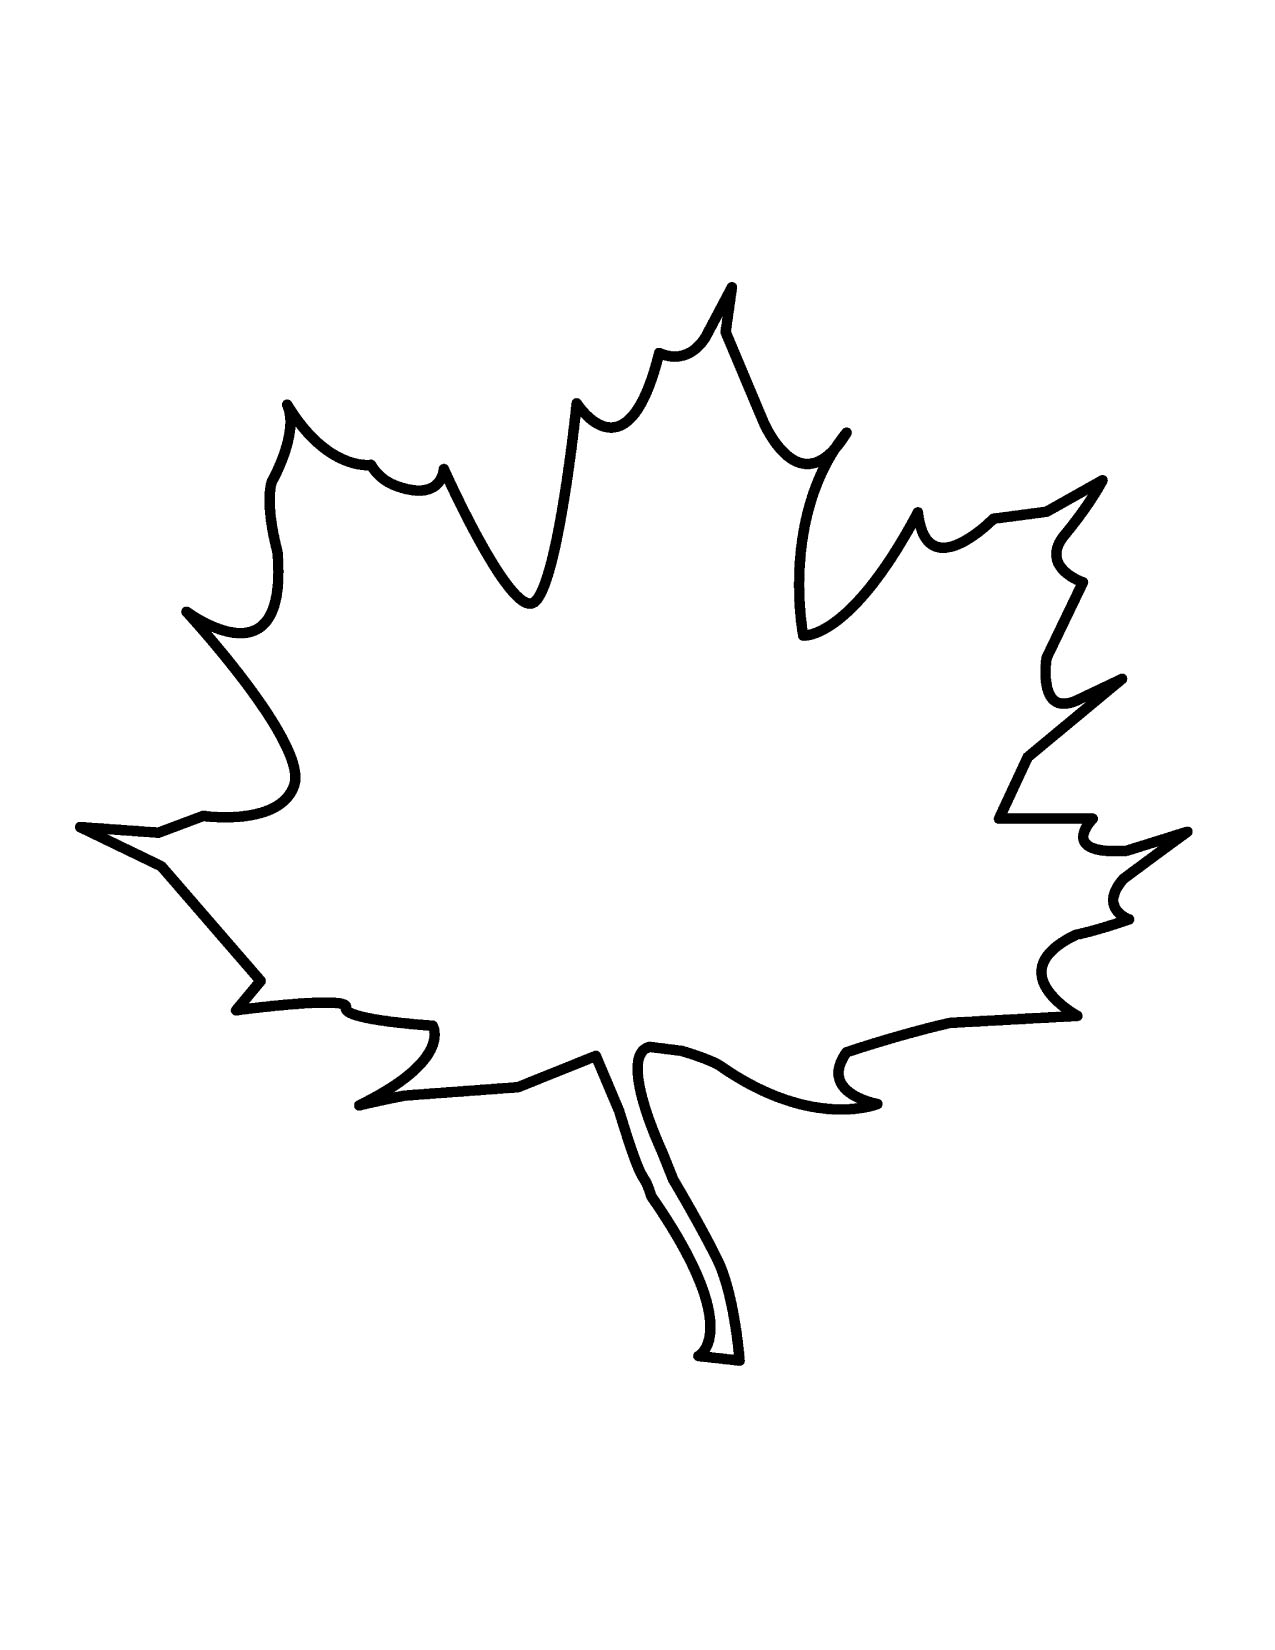 Tree Outline With Leaves Clipart.